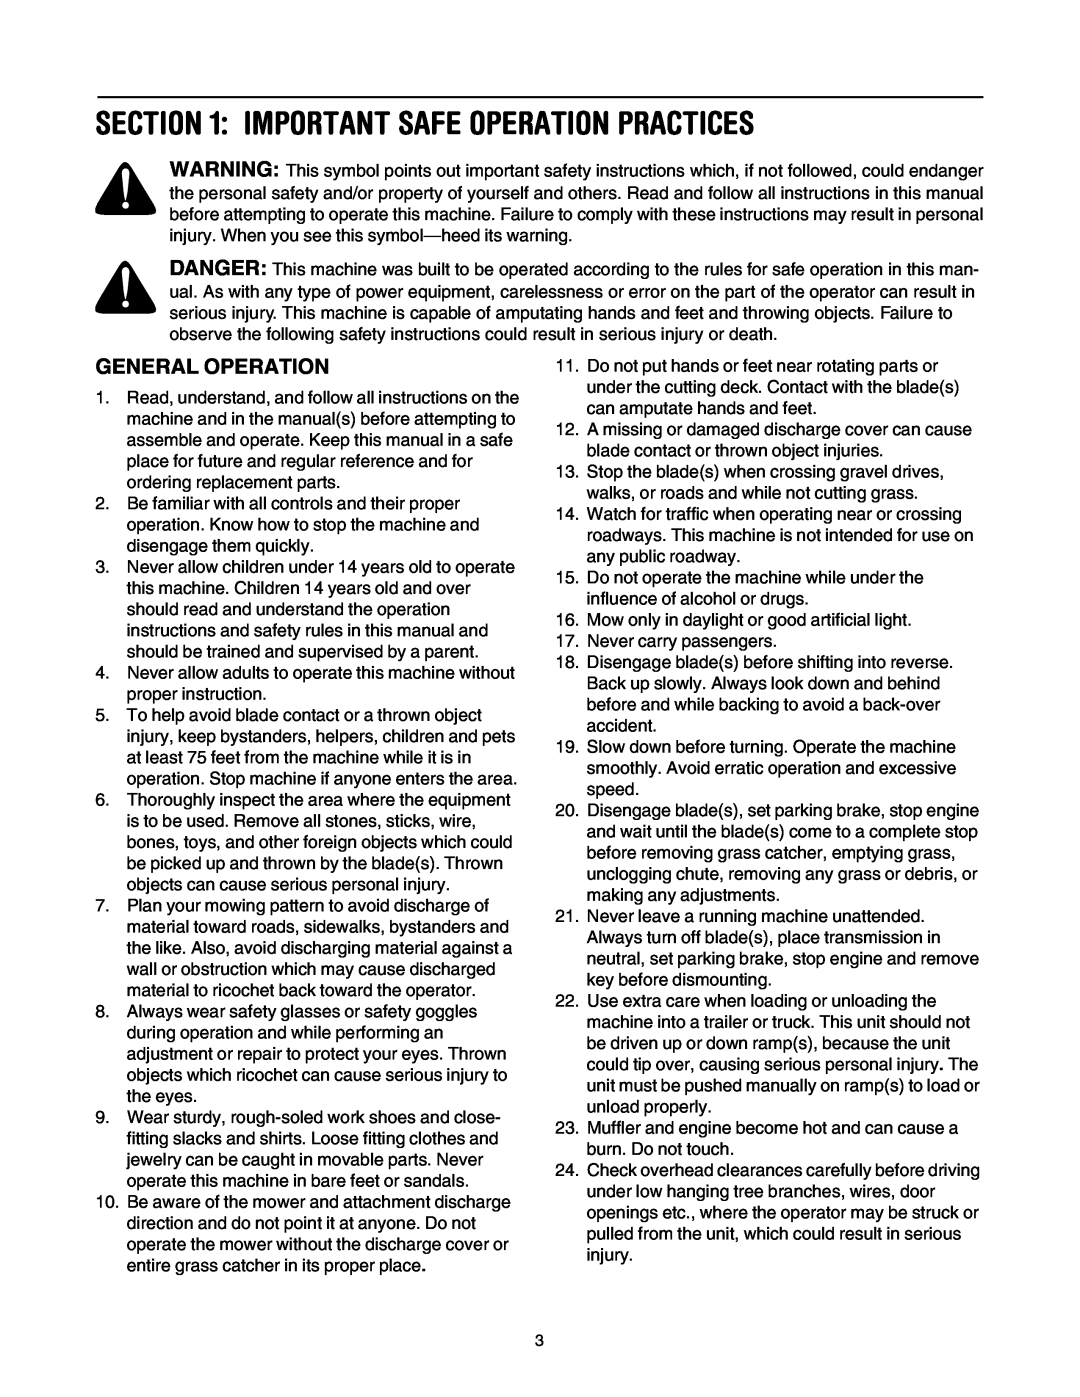 Troy-Bilt Automatic Lawn Tractor manual Important Safe Operation Practices, General Operation 